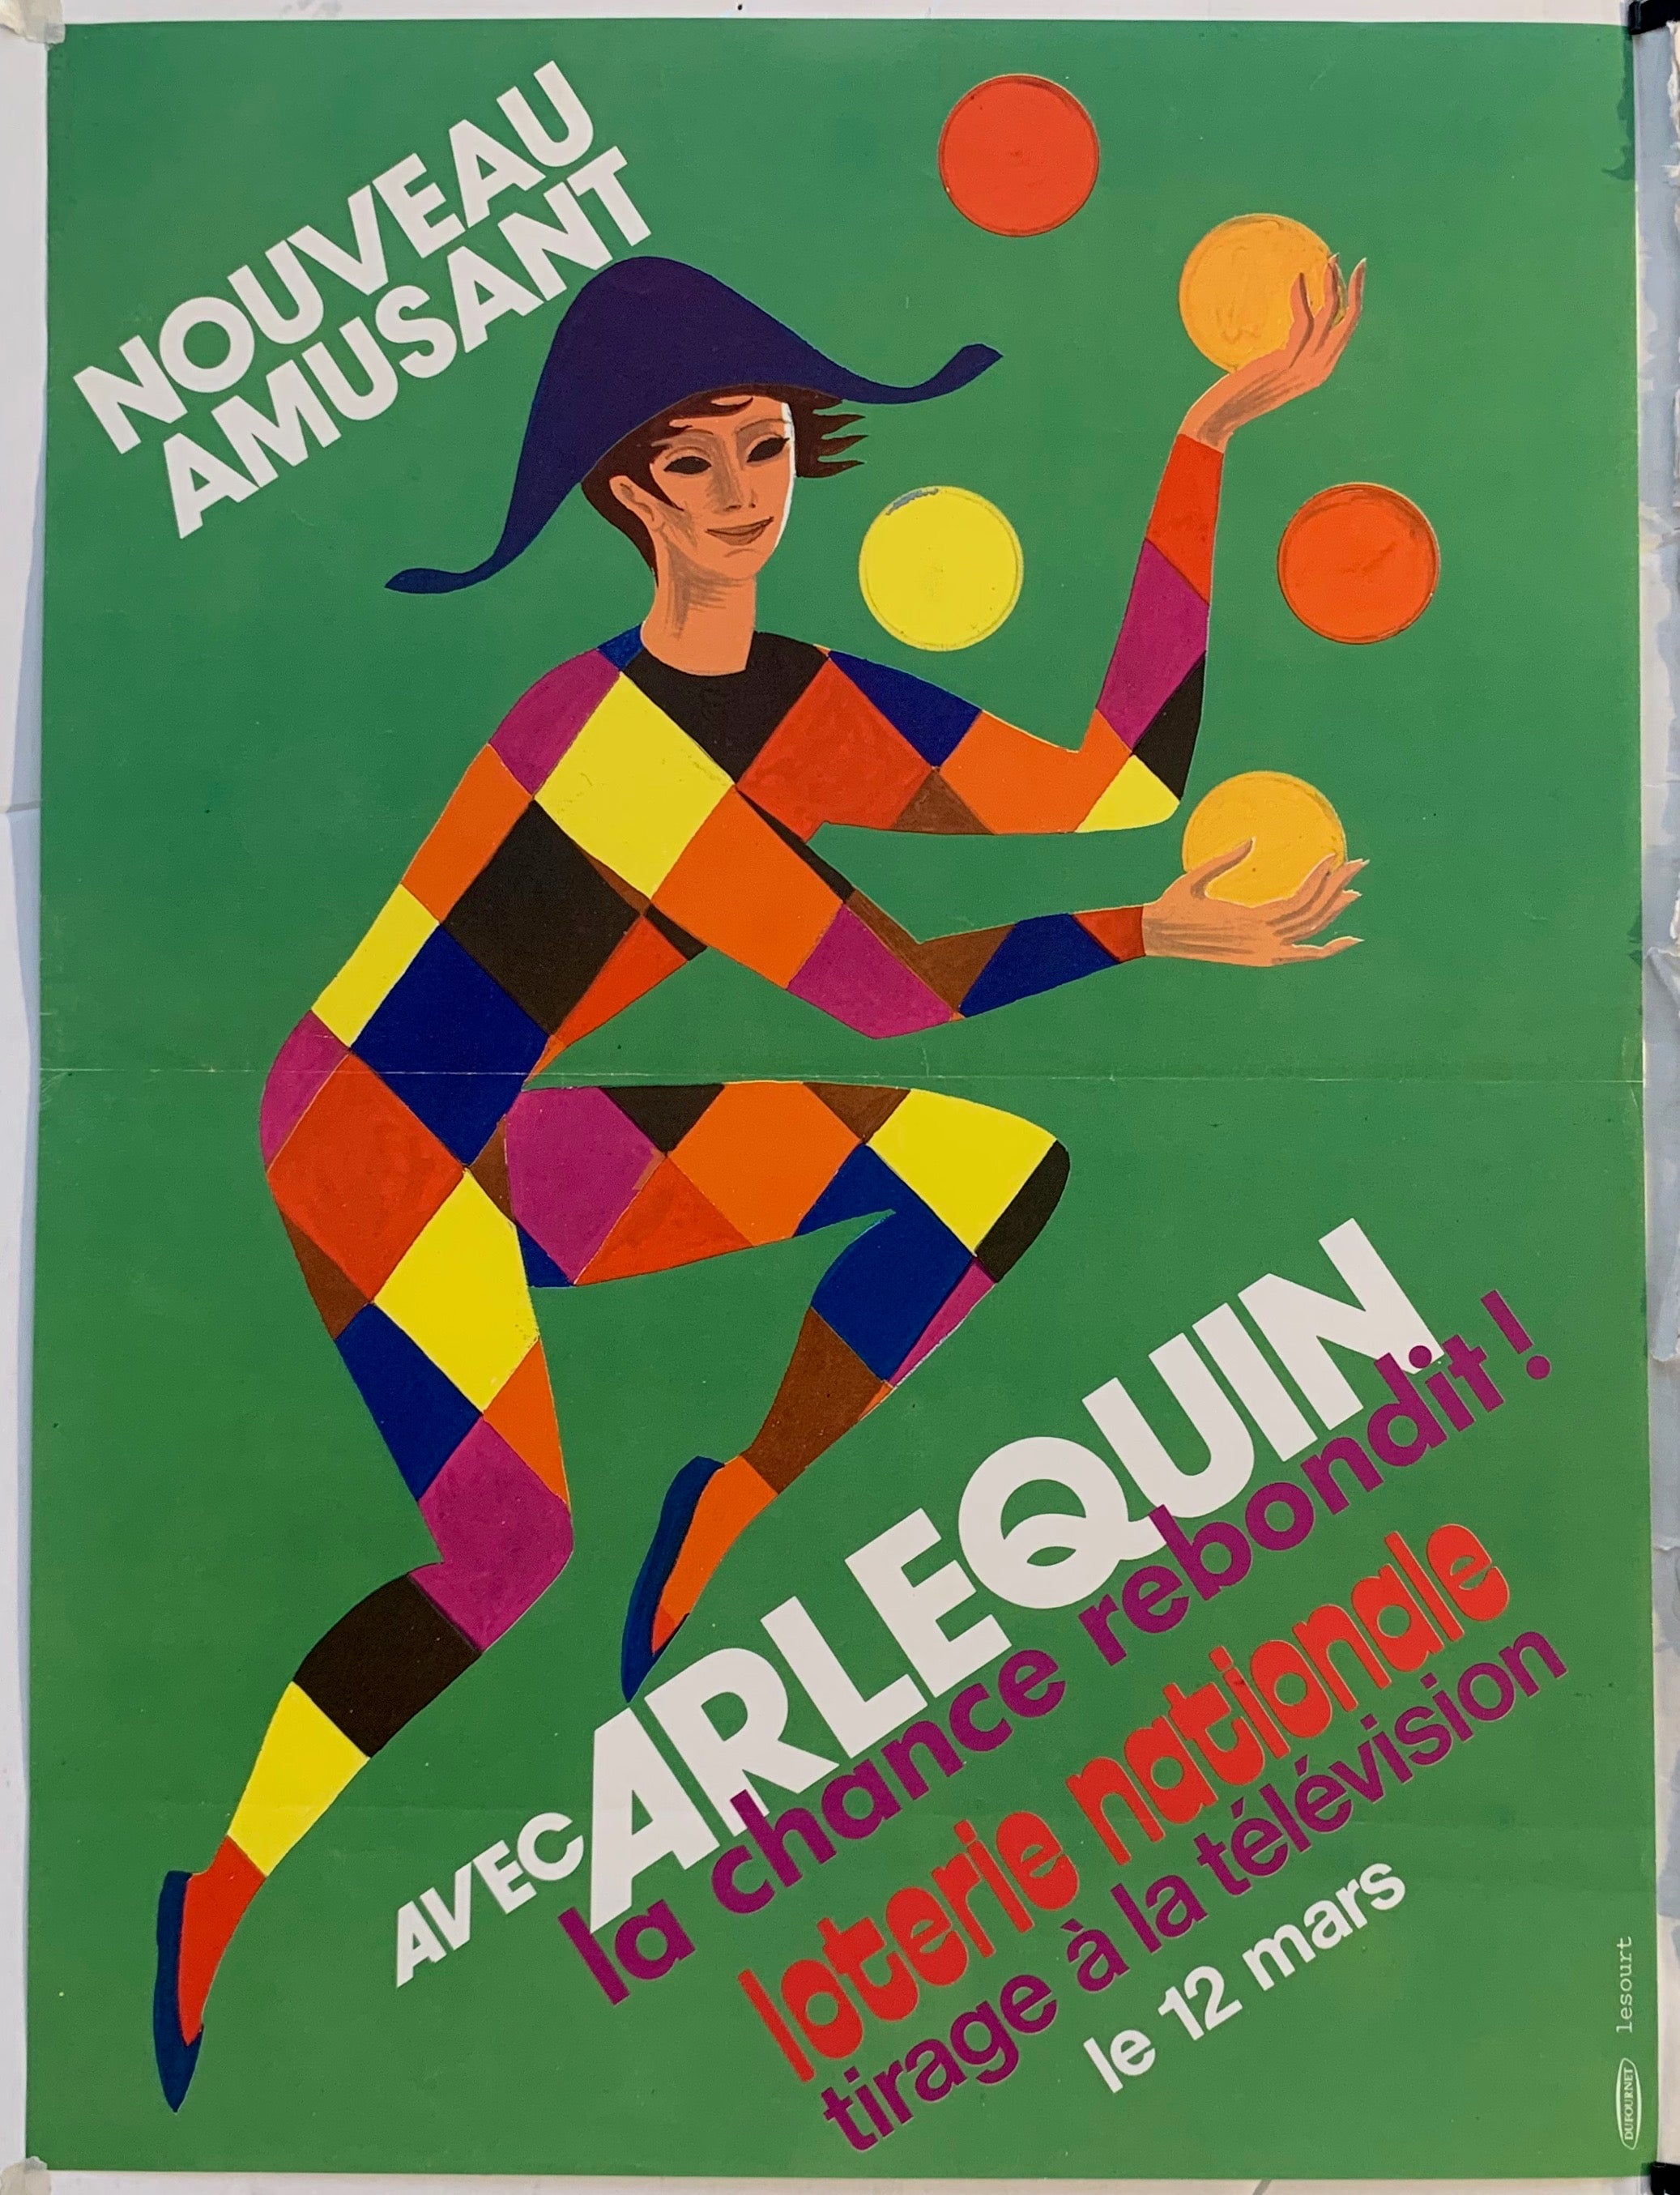 Arlequin Loterie Nationale - Juggling in Green